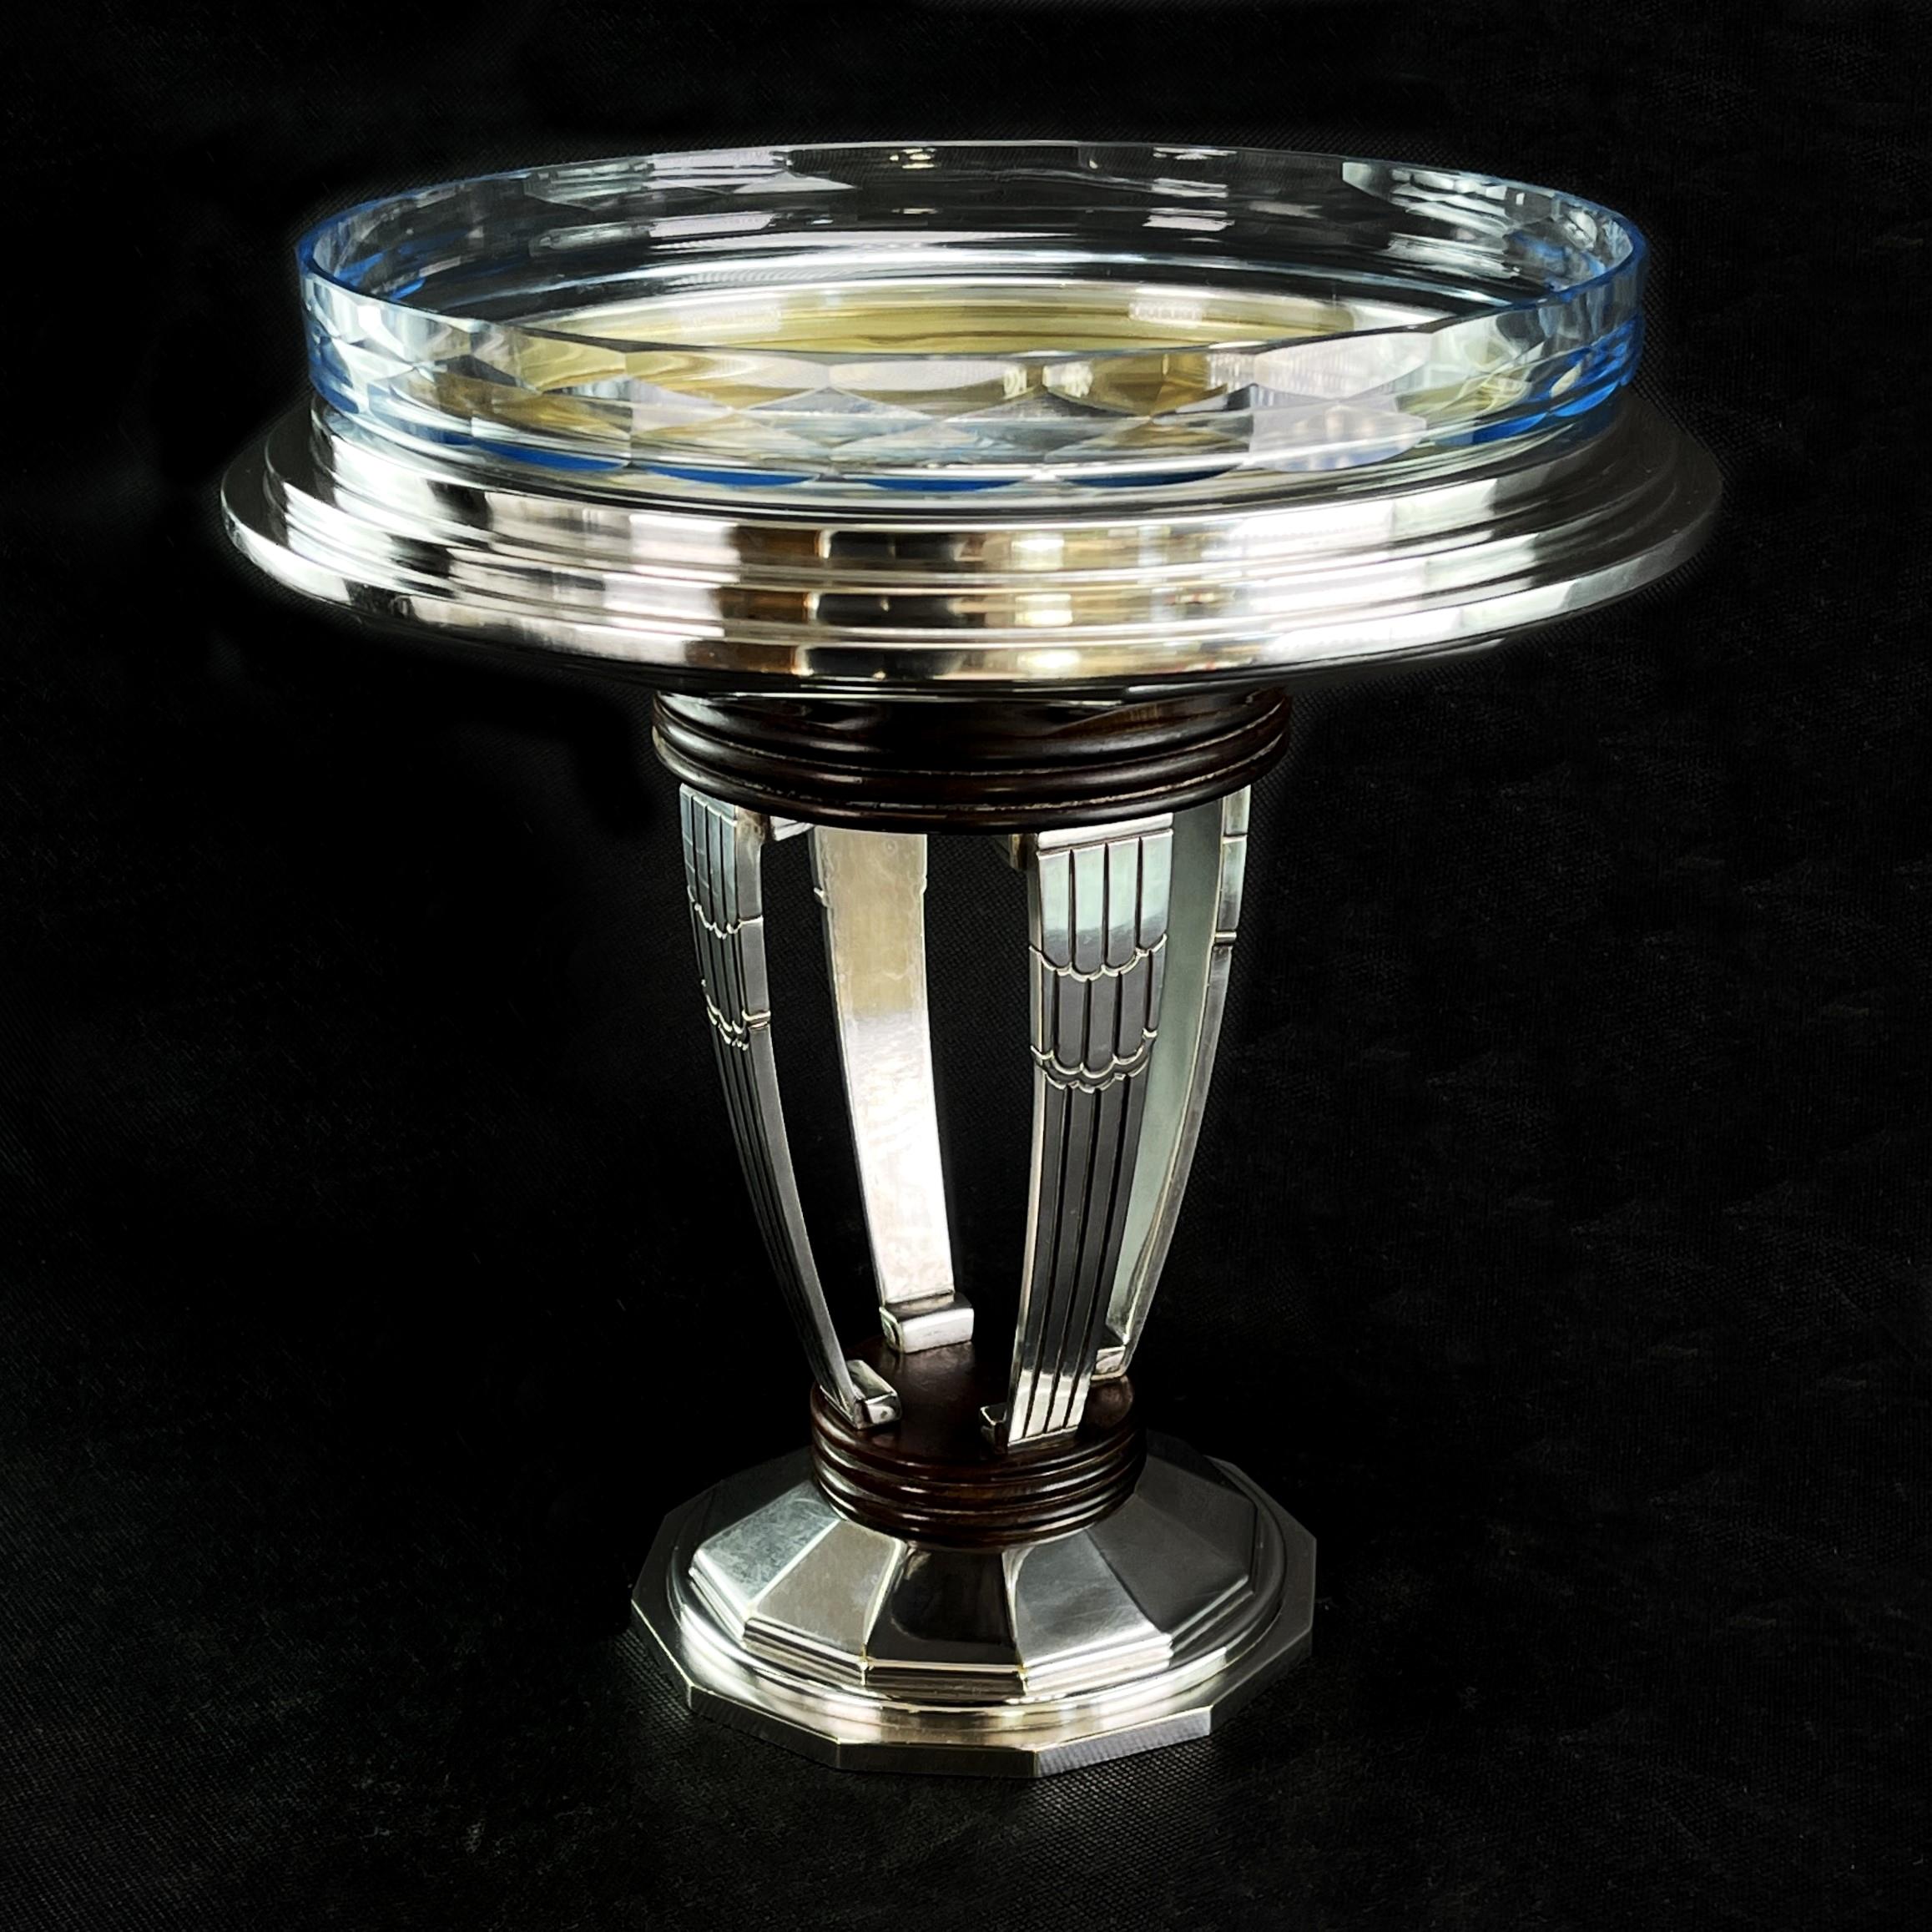 ART DECO centrepiece bowl by Durousseau & Raynaud silver plated 1930s

This magnificent French centrepiece from the 1930s is in the style of the Streamline Modern Art Deco. The silverplated jardiniere by Durousseau and Raynaud is set off with ornate